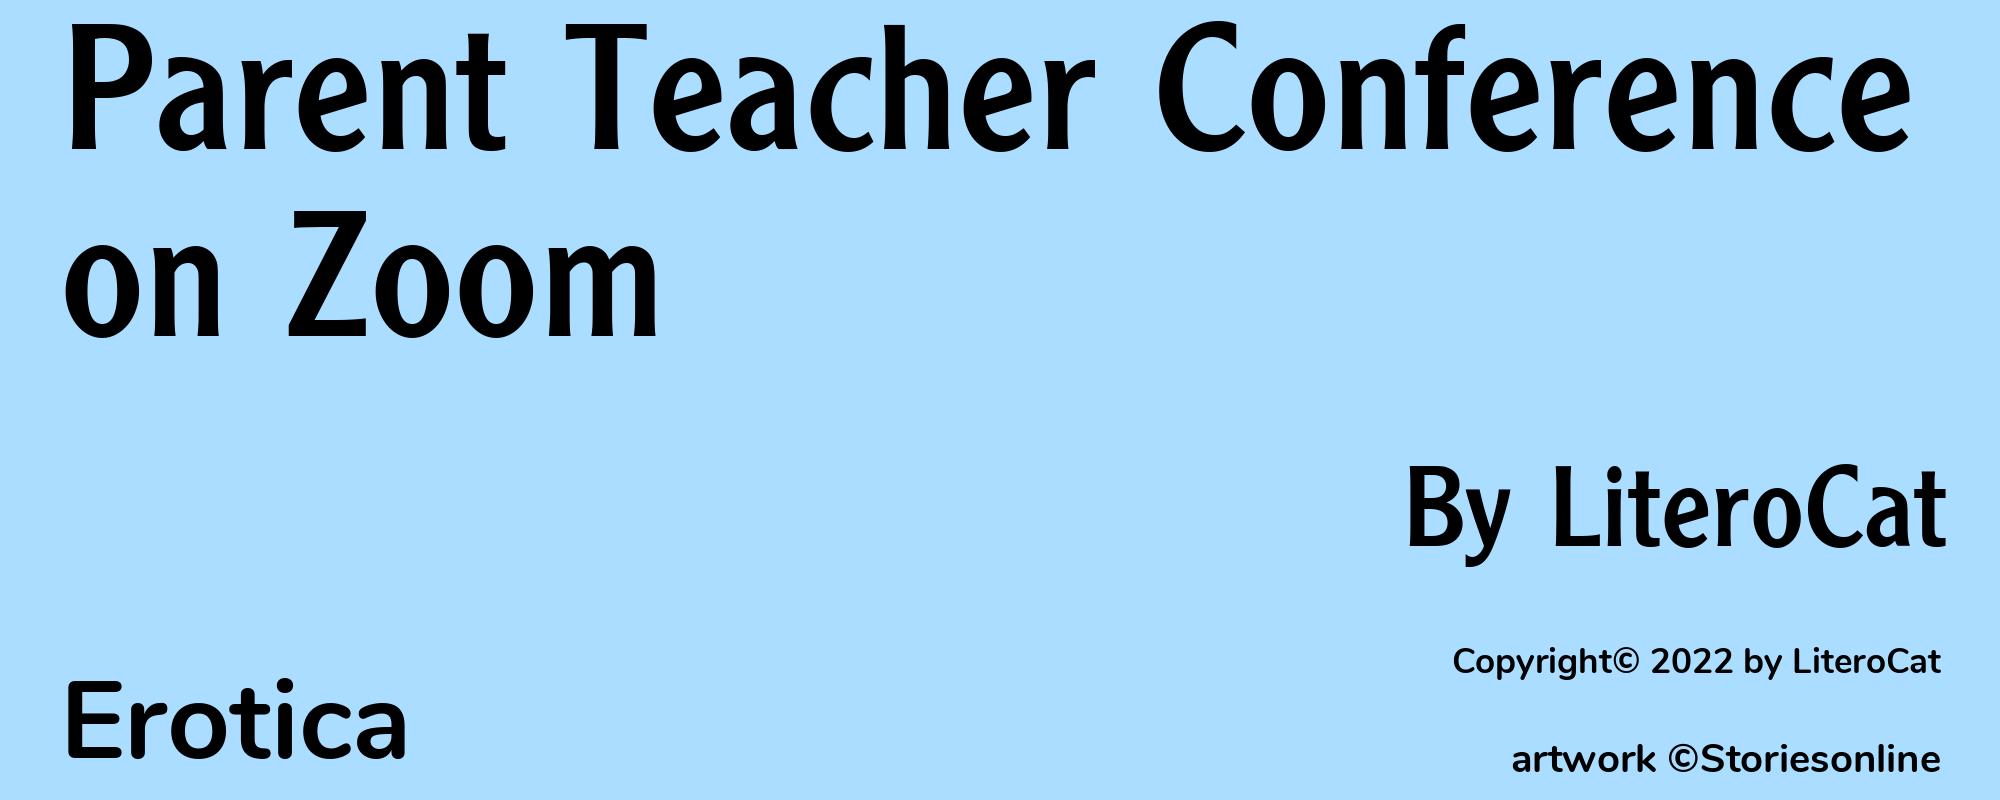 Parent Teacher Conference on Zoom - Cover